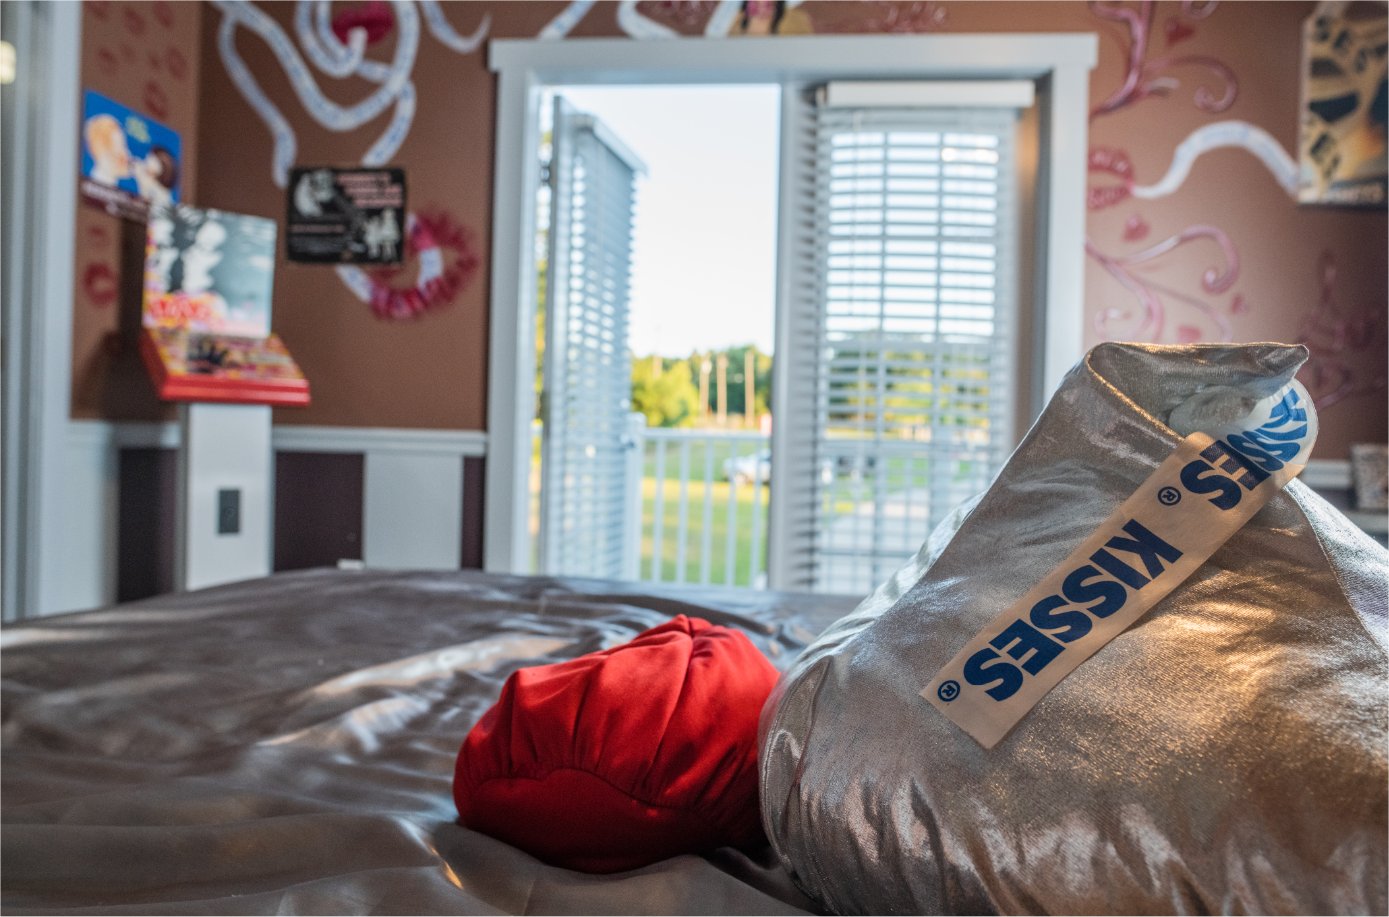 Rent The Sweet Escape vacation home near Orlando, Florida and enjoy the Hershey Kisses themed bedroom!